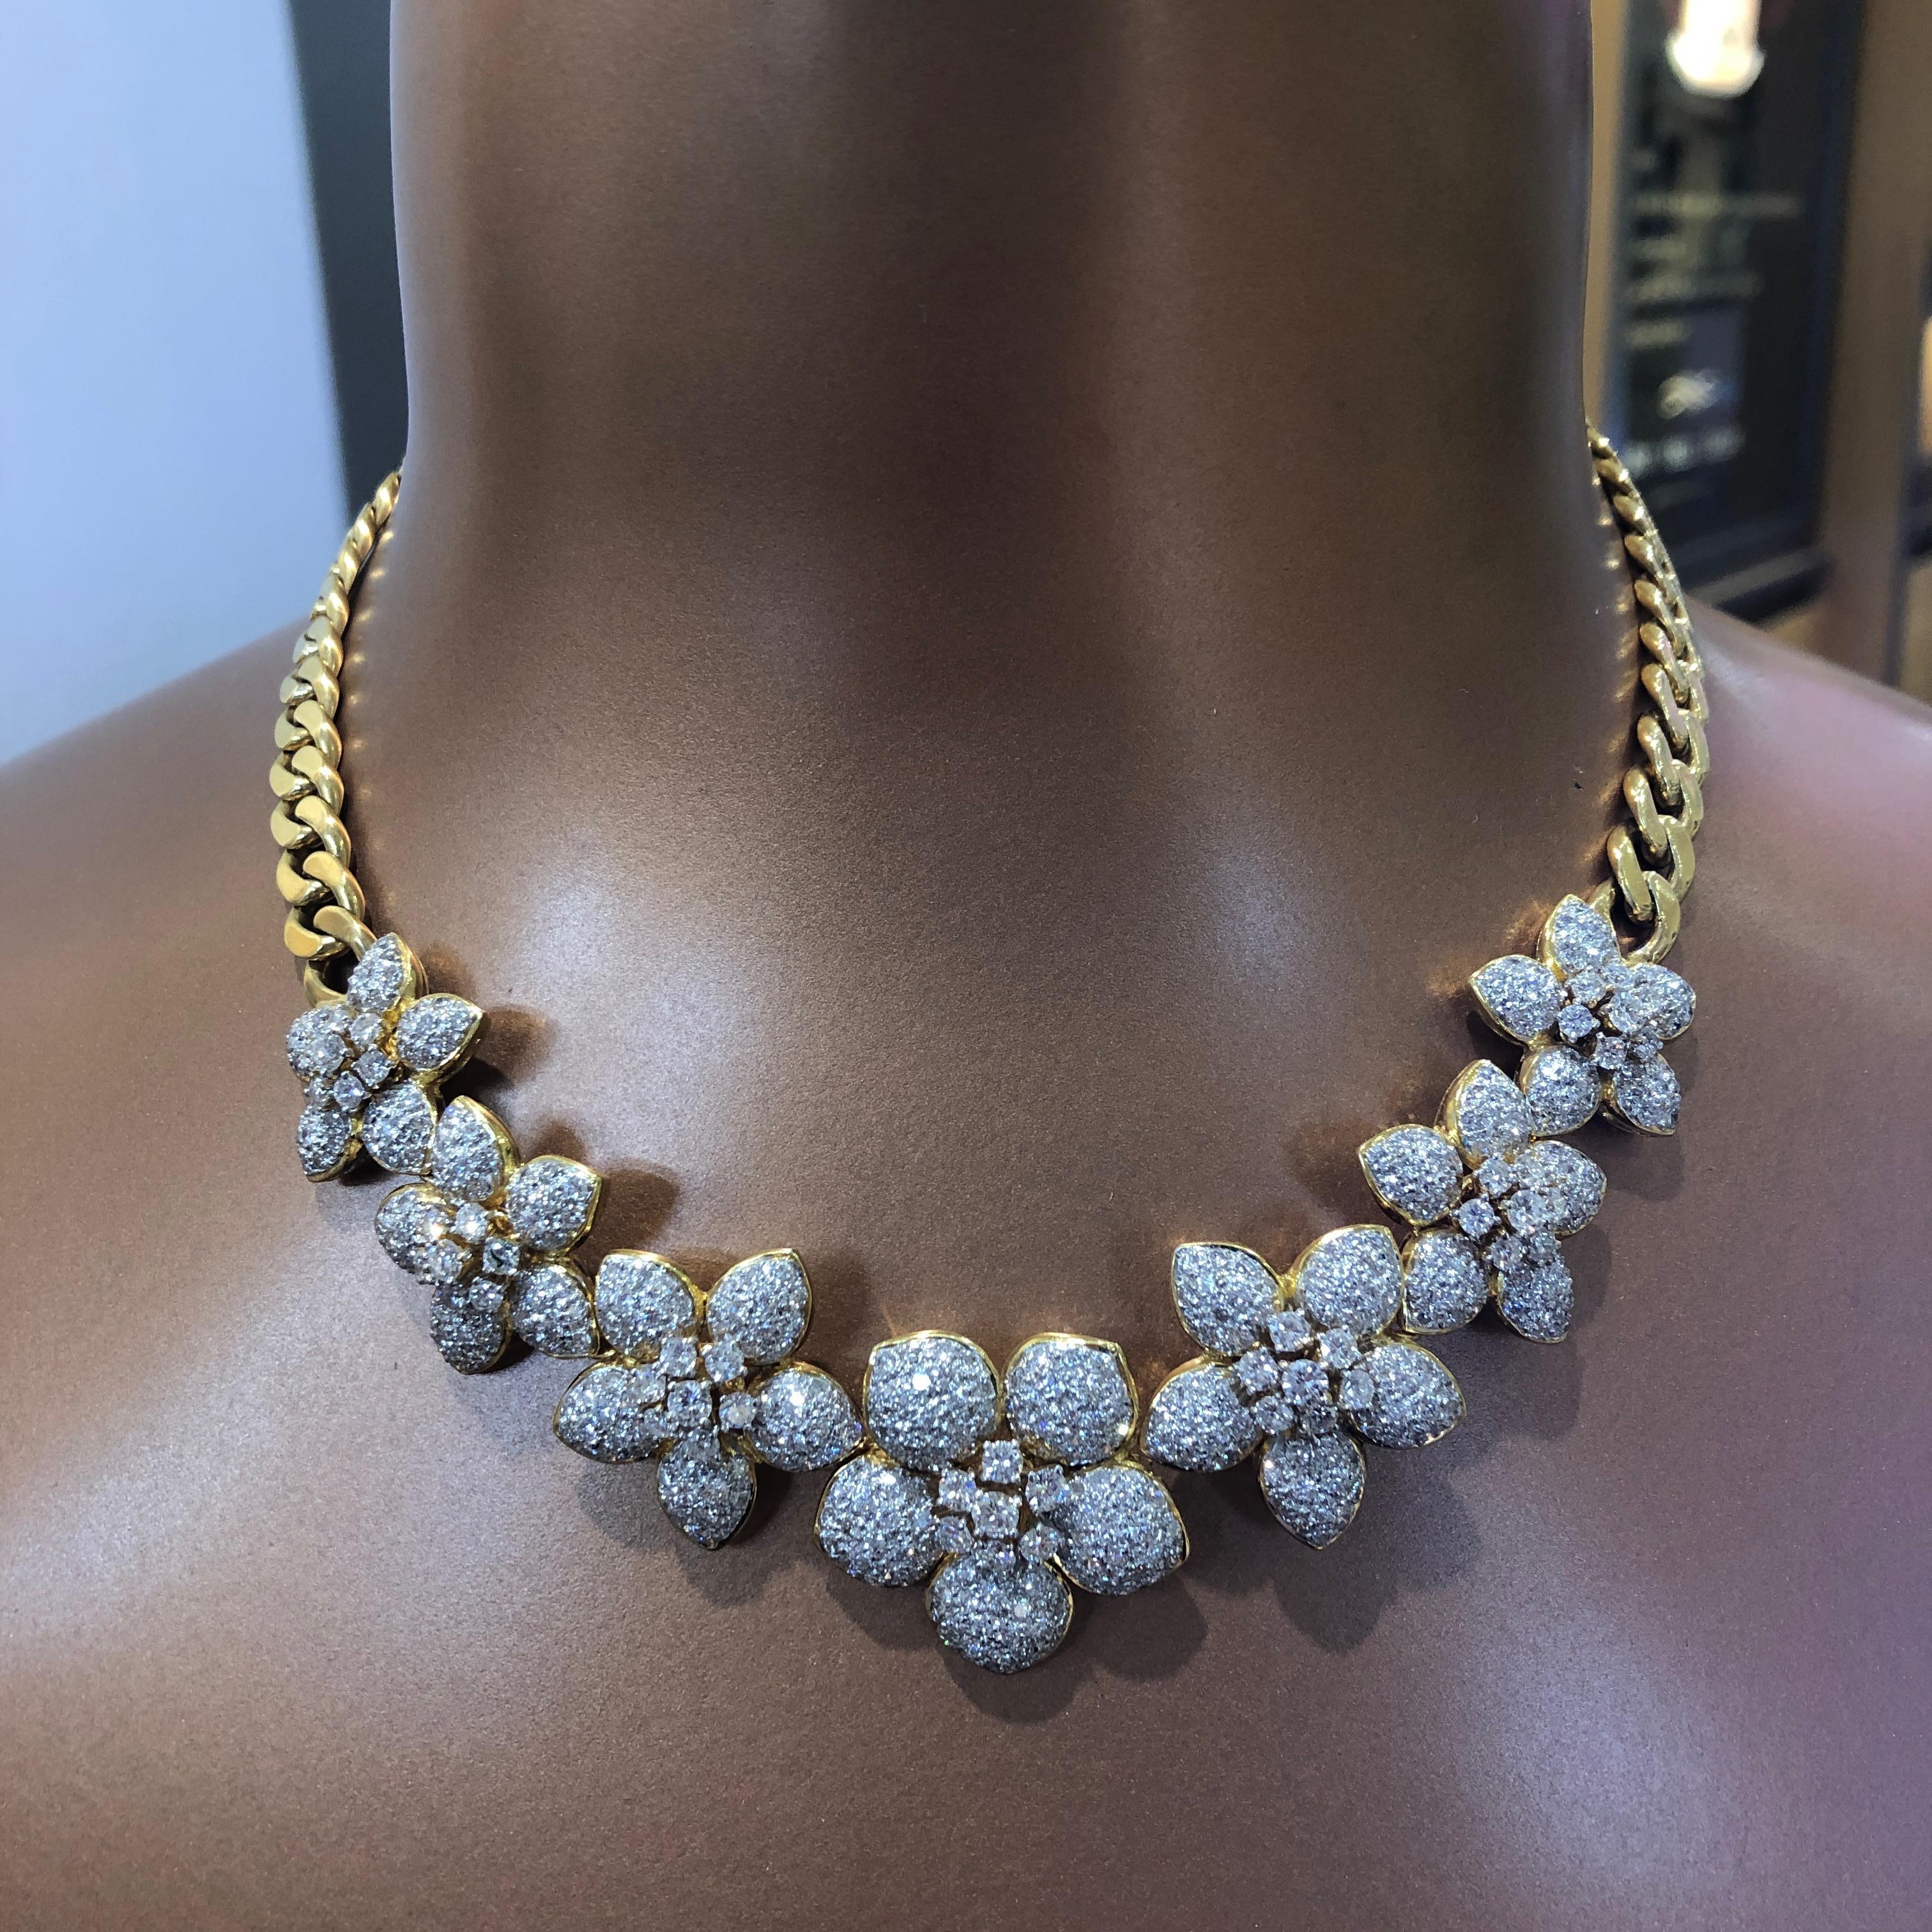 This one-of-a-kind diamond estate necklace features seven (7) pave diamond flowers and designed in 18 karat yellow gold. Each flower contains a diamond cluster center surrounded by pave petals. The flowers are attached to a heavy solid gold polished